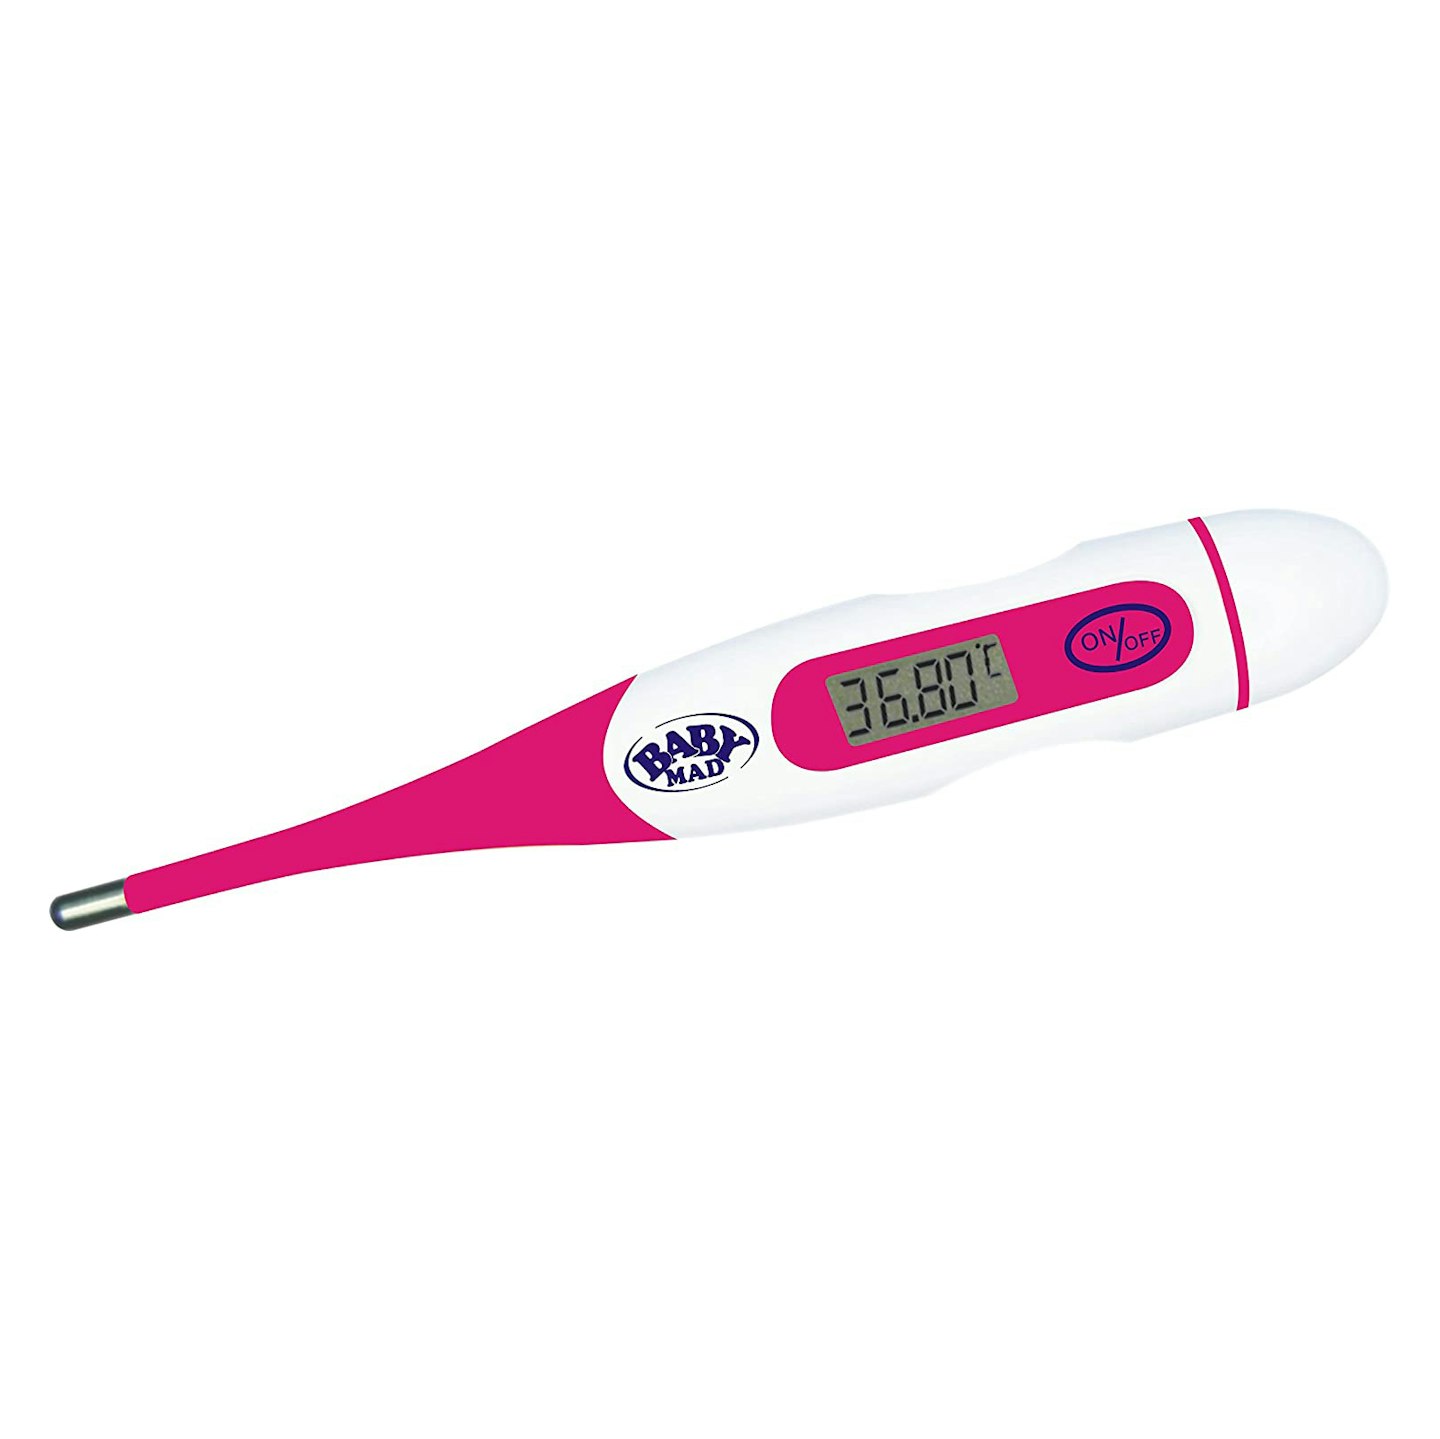 The 6 Best Basal Body Thermometers